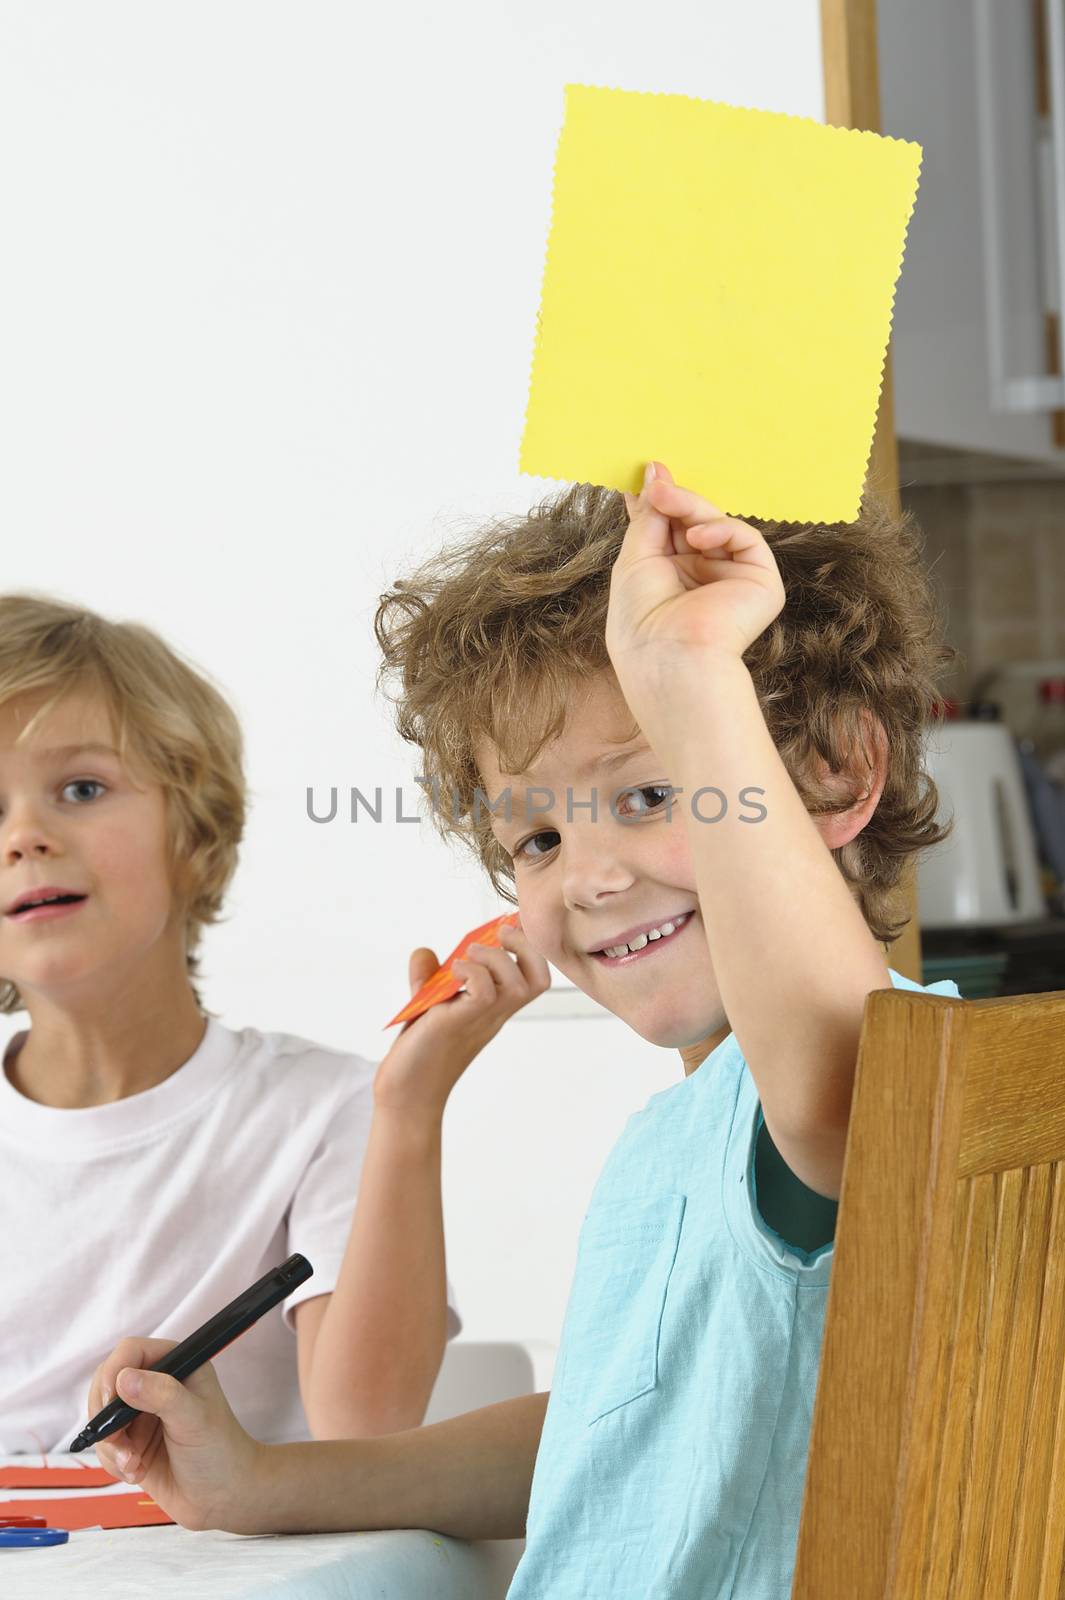 Young boy holds up a blank yellow card. Another boy in the background looks at the camera.